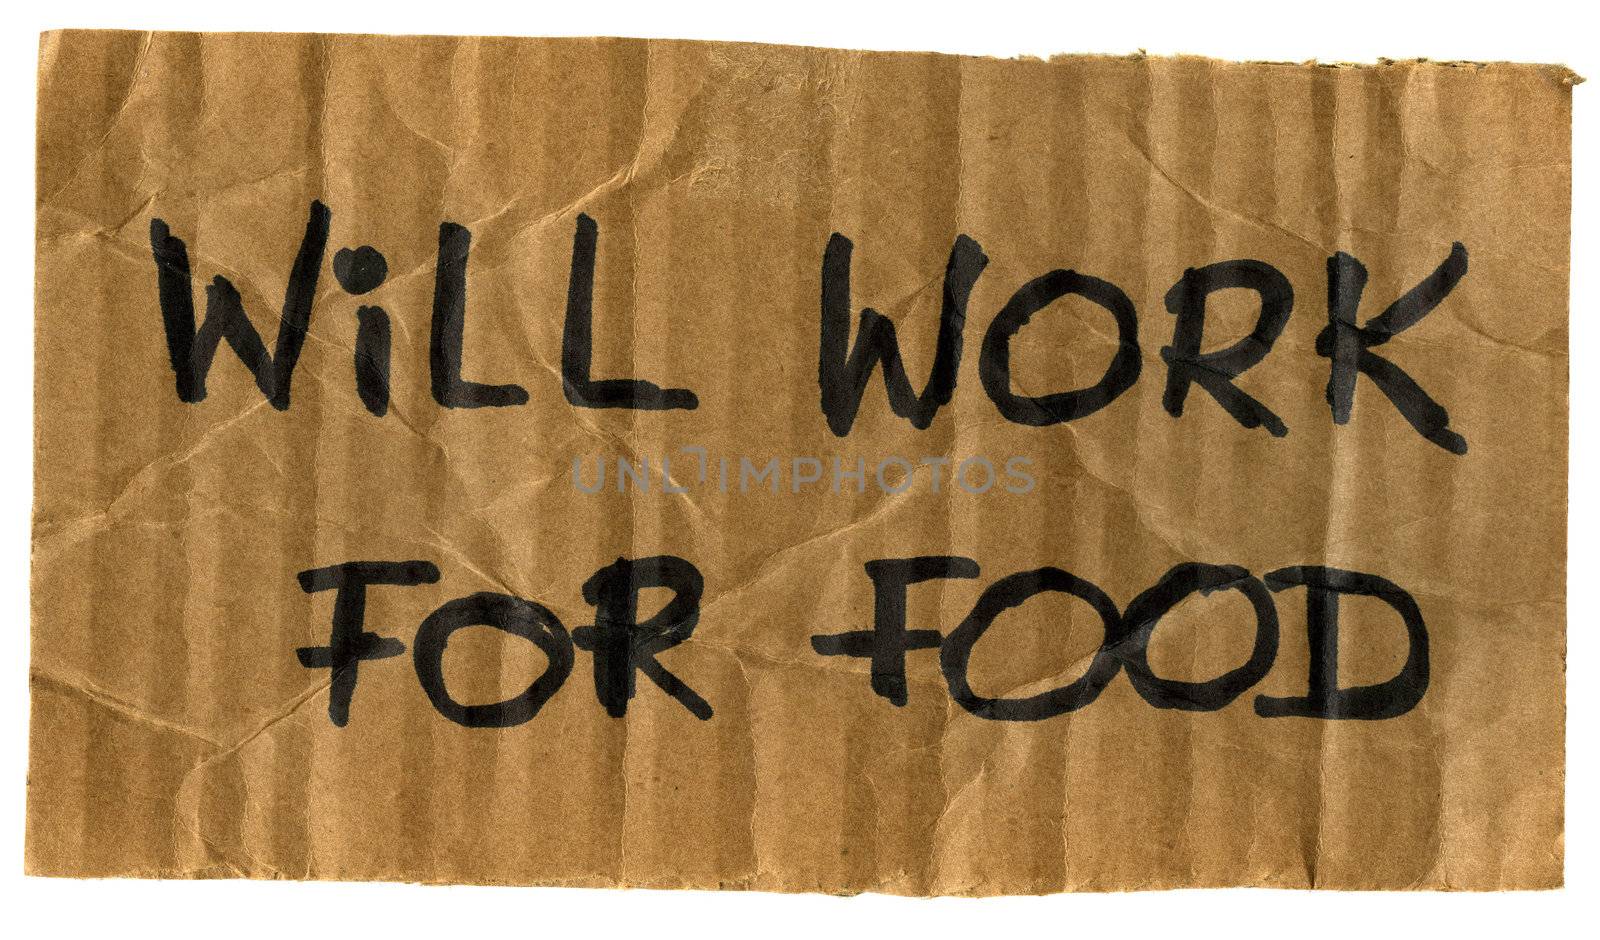 will work for food cardboard sign by PixelsAway